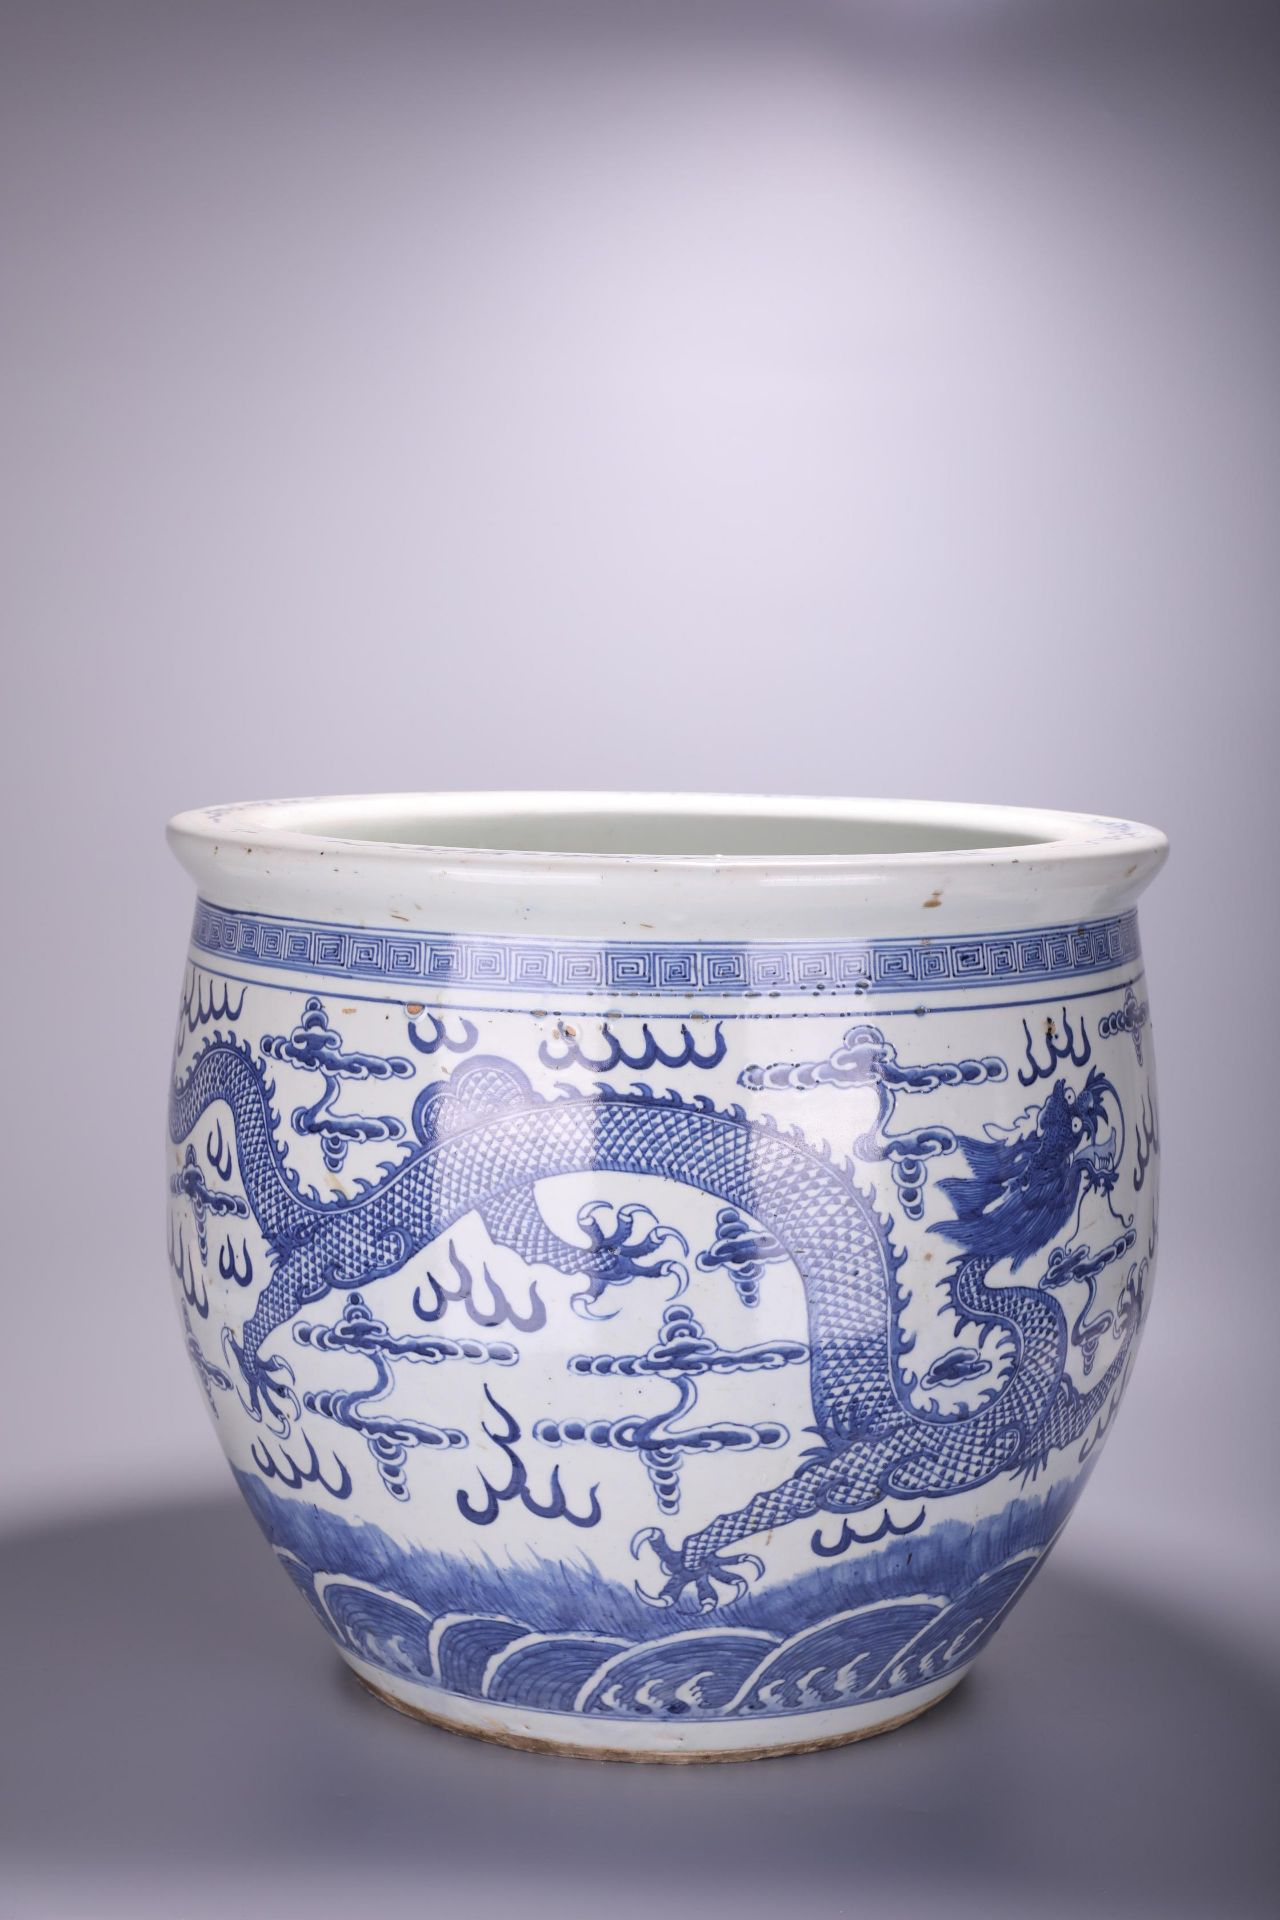 A Chinese blue and white Dragons' jardiniere, H 40,5 - Dia 46,5 cm